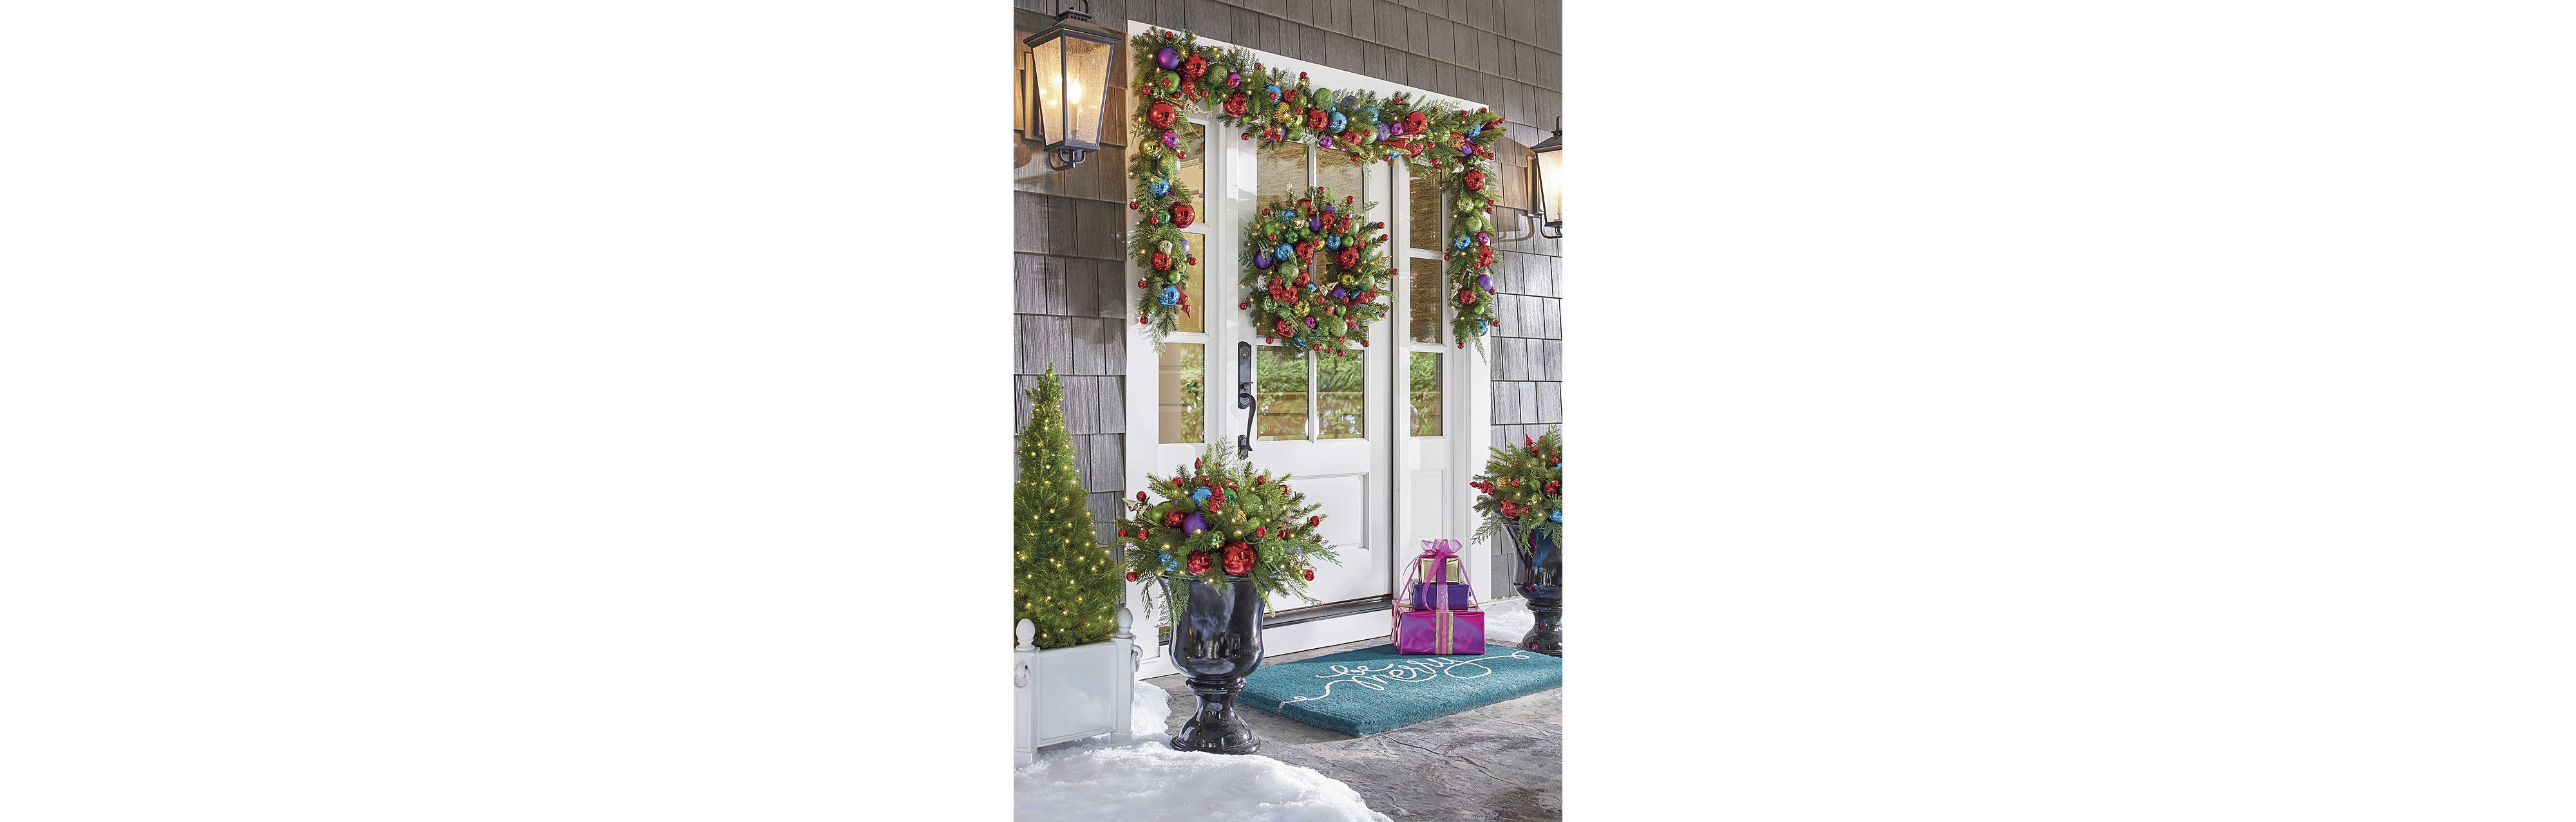 Christmas Porch Decorations 15 Holly Jolly Looks  Grandin Road Blog